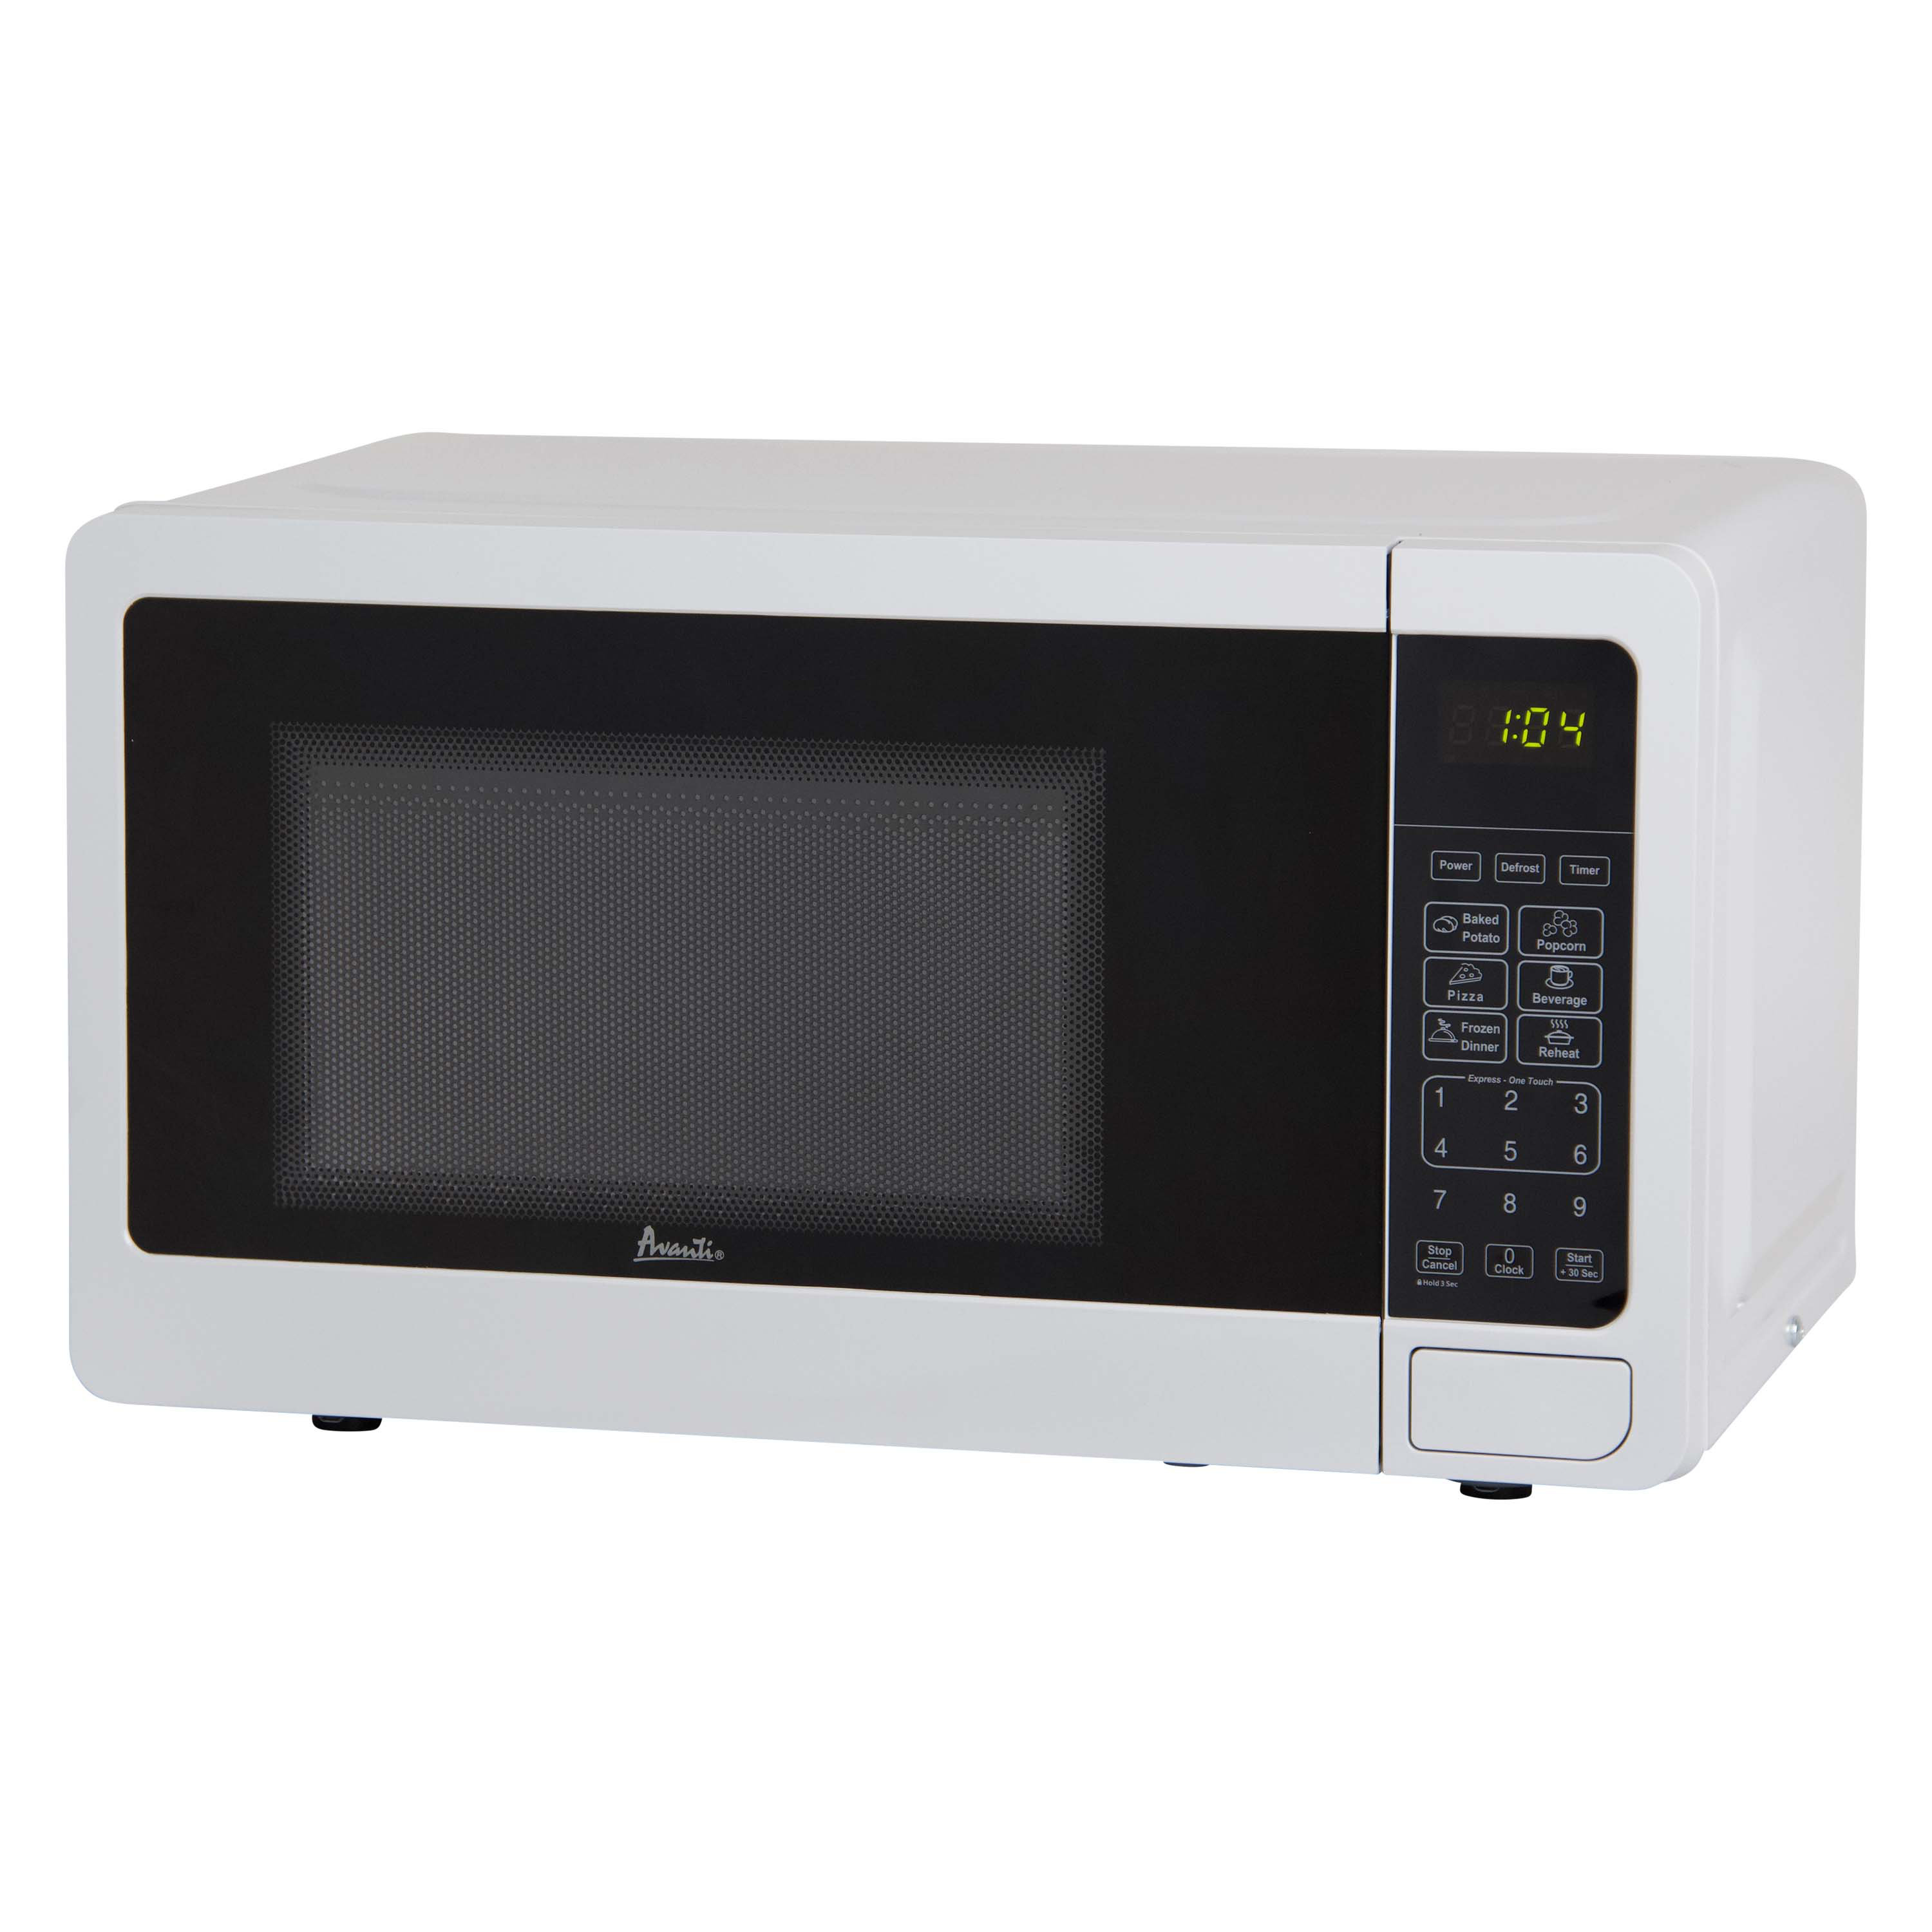 GE Countertop Microwave Oven | 0.7 Cubic Feet Capacity, 700 Watts | Kitchen  Essentials for the Countertop or Dorm Room | Stainless Steel